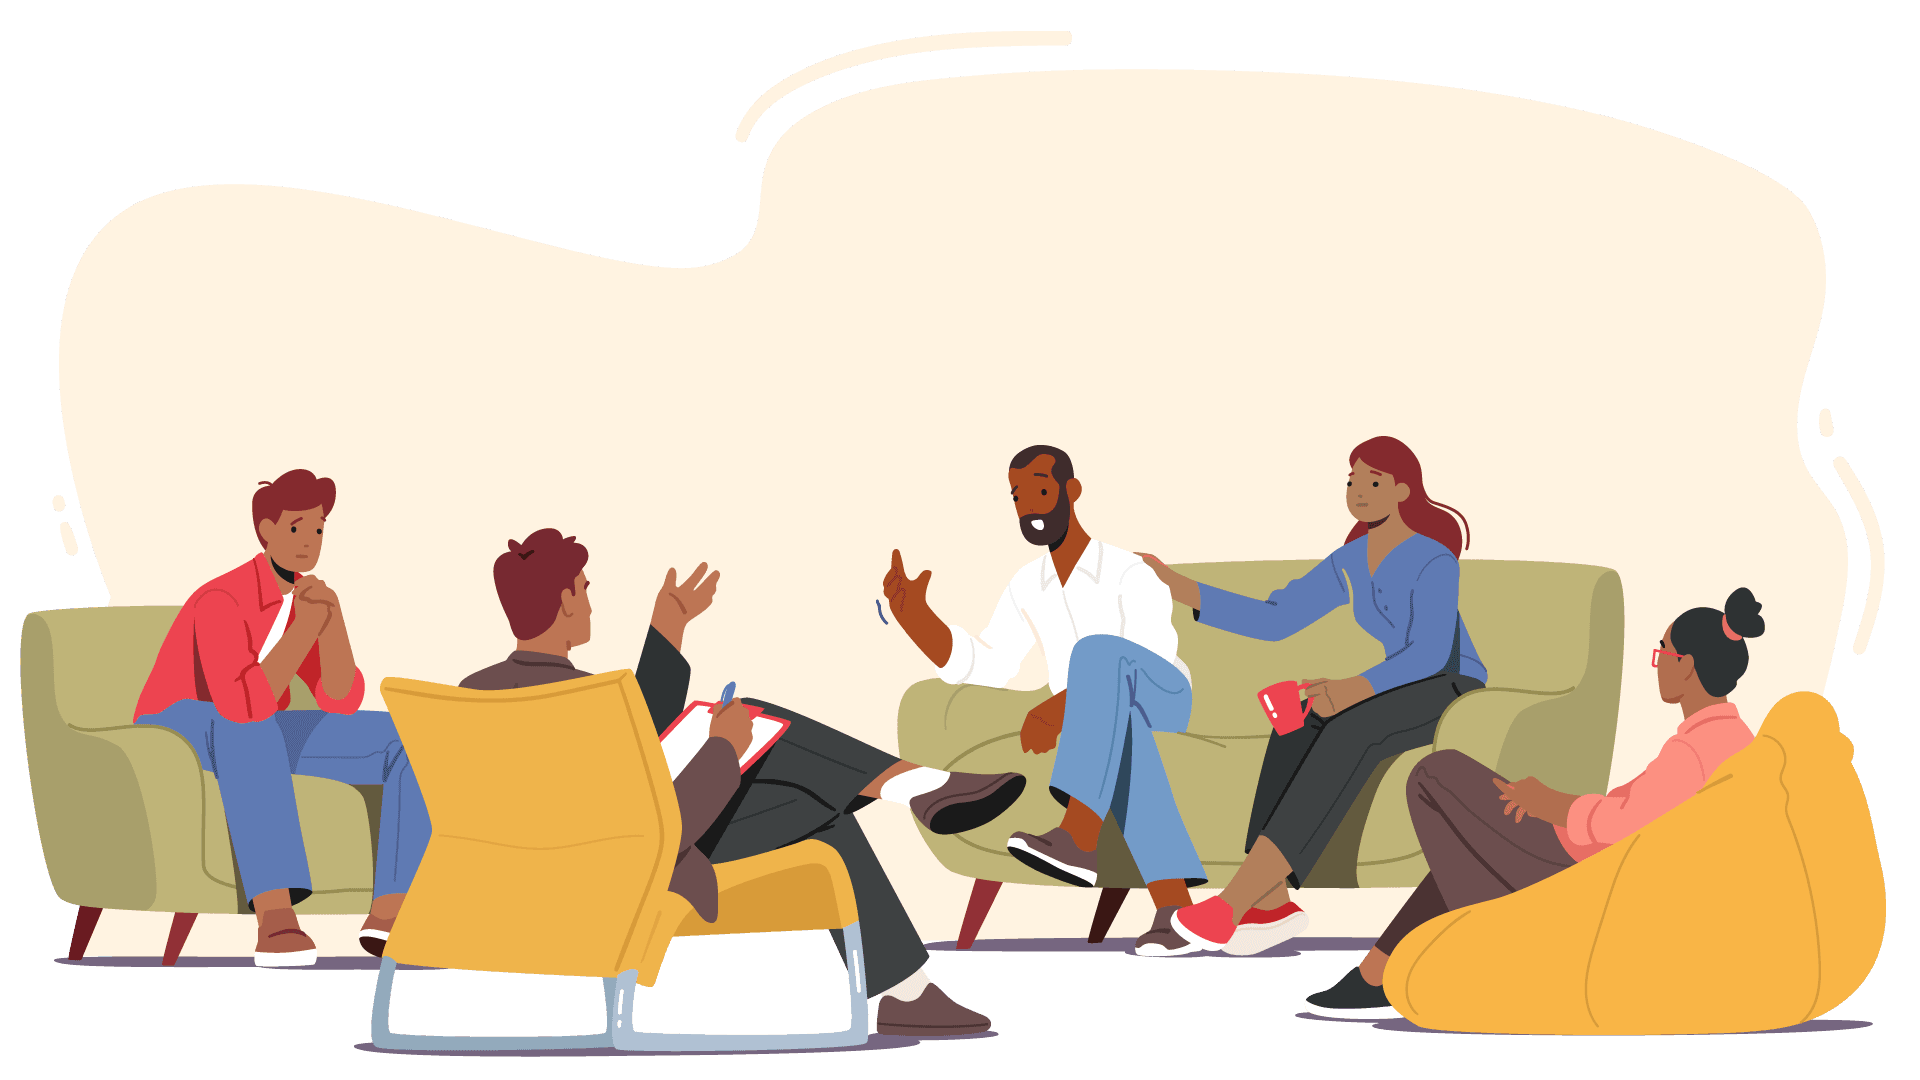 illustration of people sitting on chairs and couches and talking